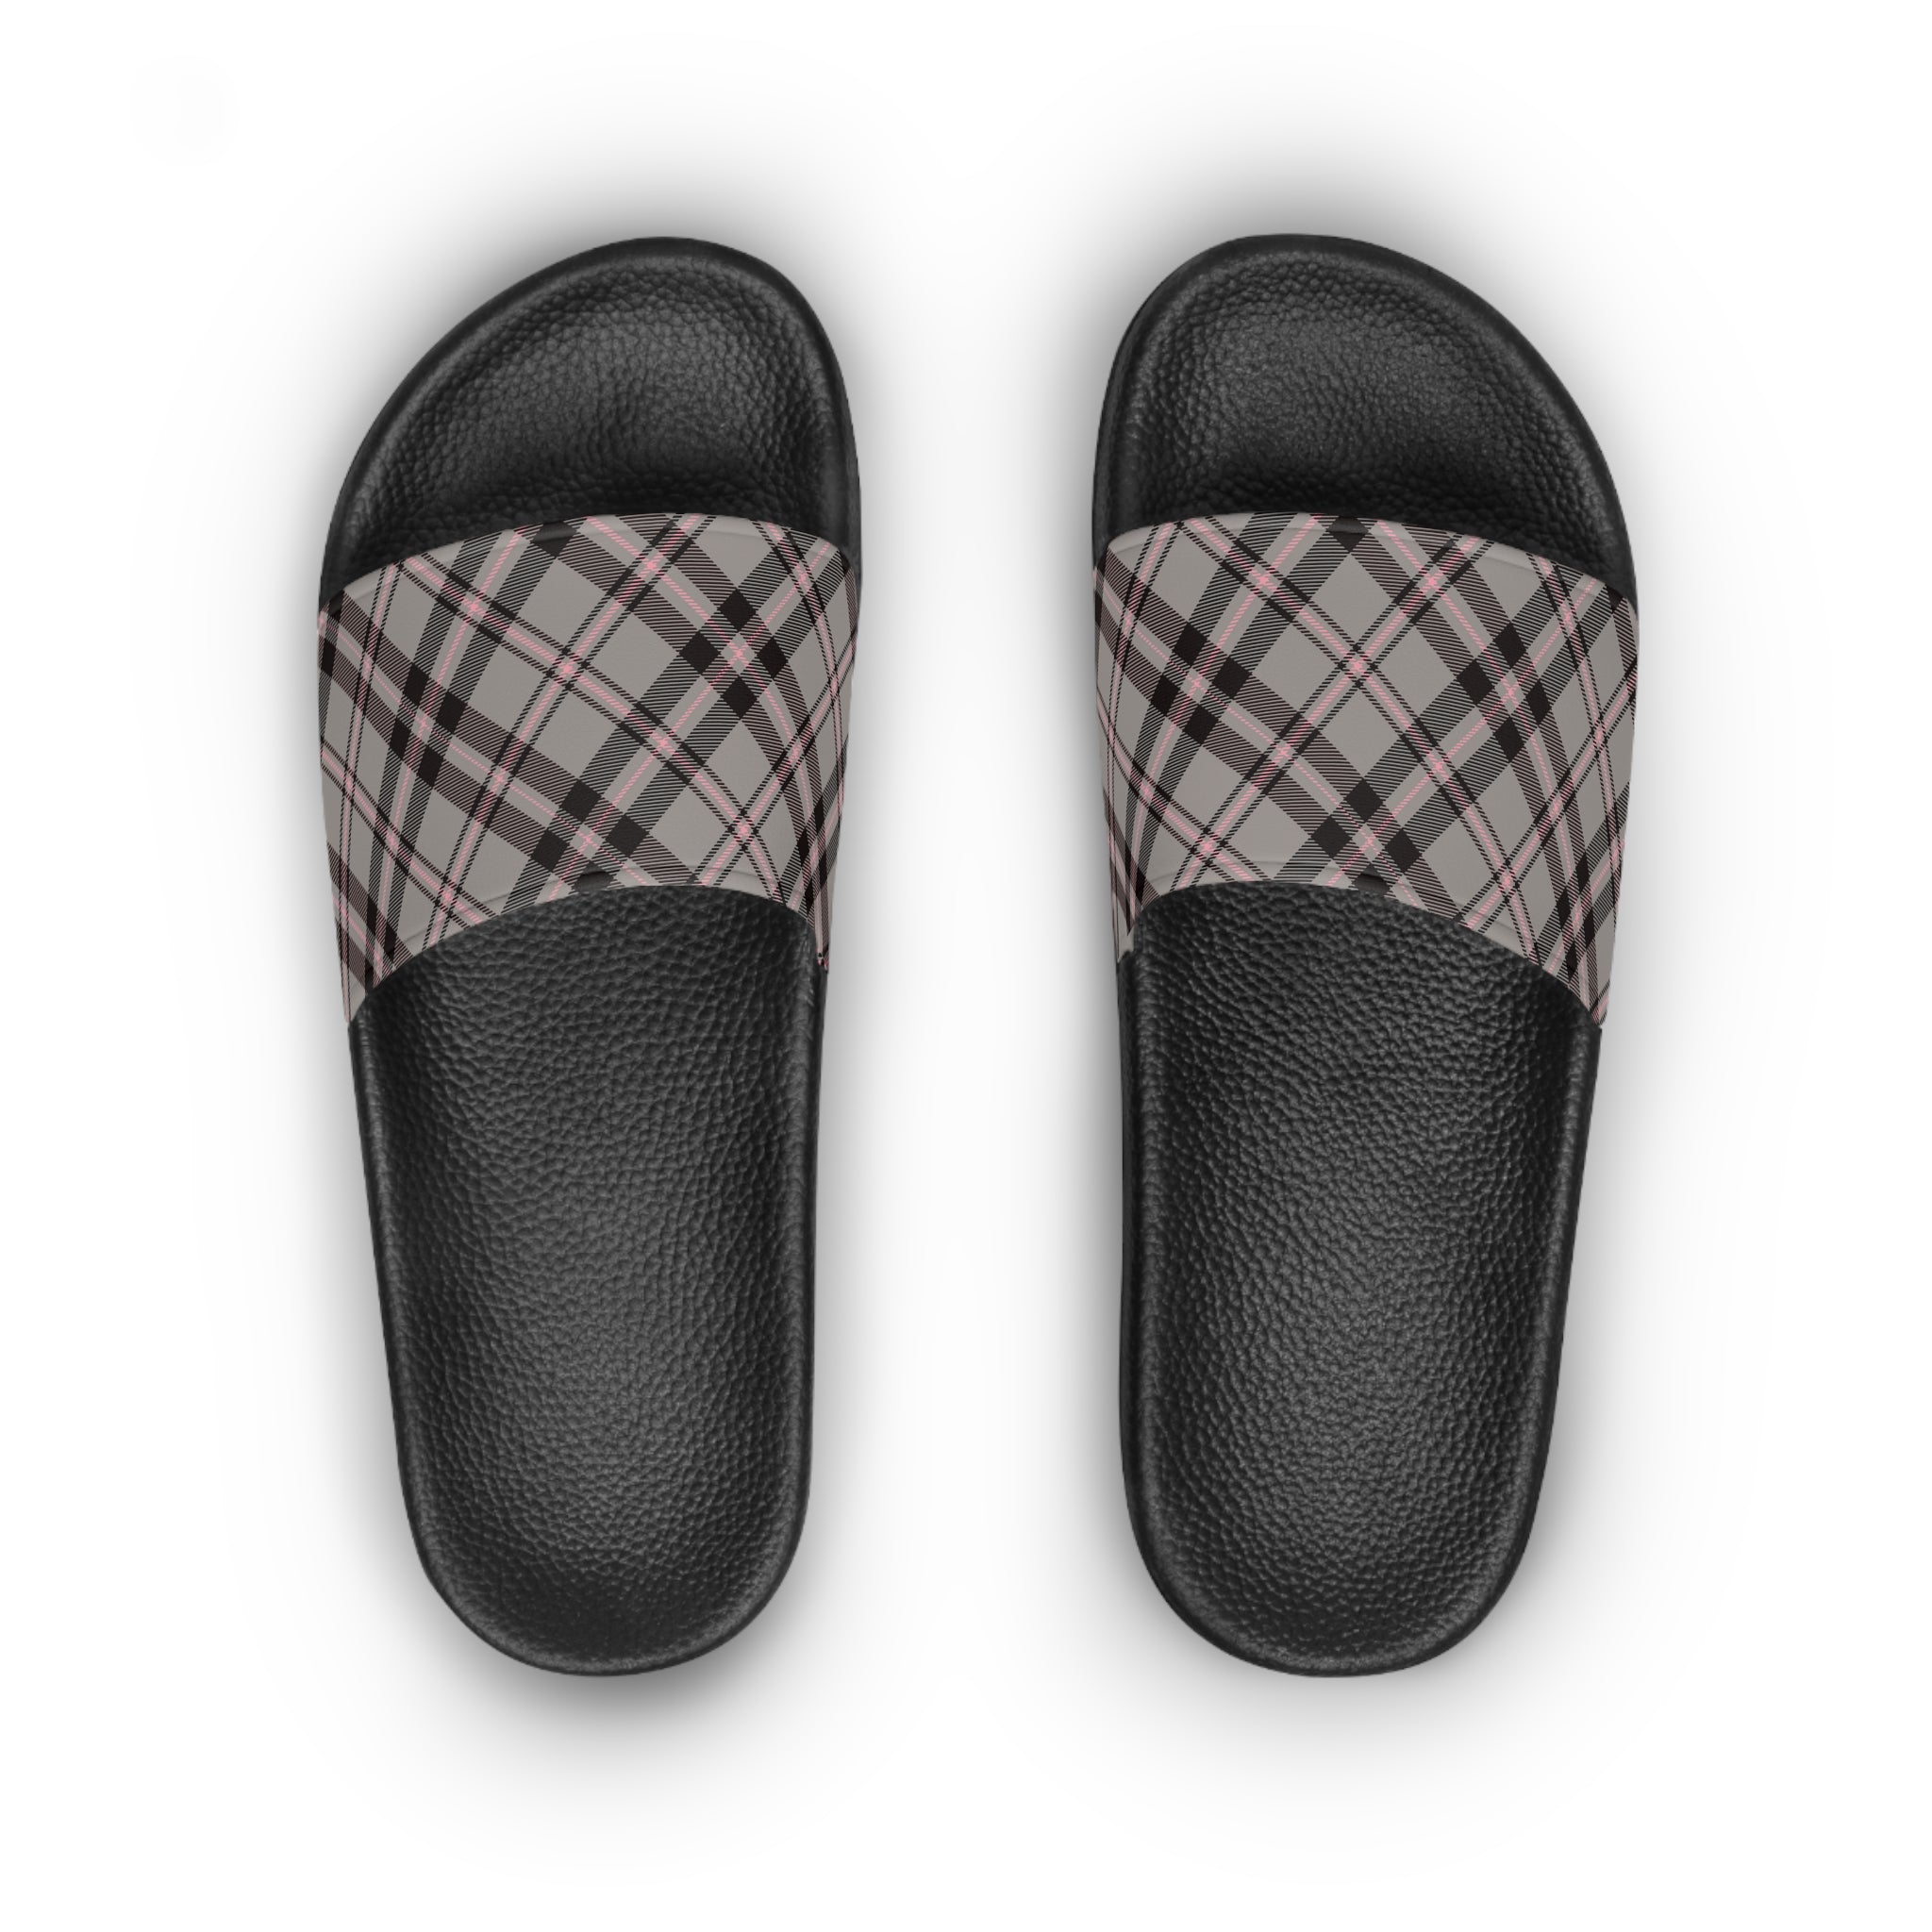  Abby Pattern in Gray and Pink Women's Slide Sandals, Slide Sandals for Women, Plaid Slip Ons ShoesBlacksoleUS5